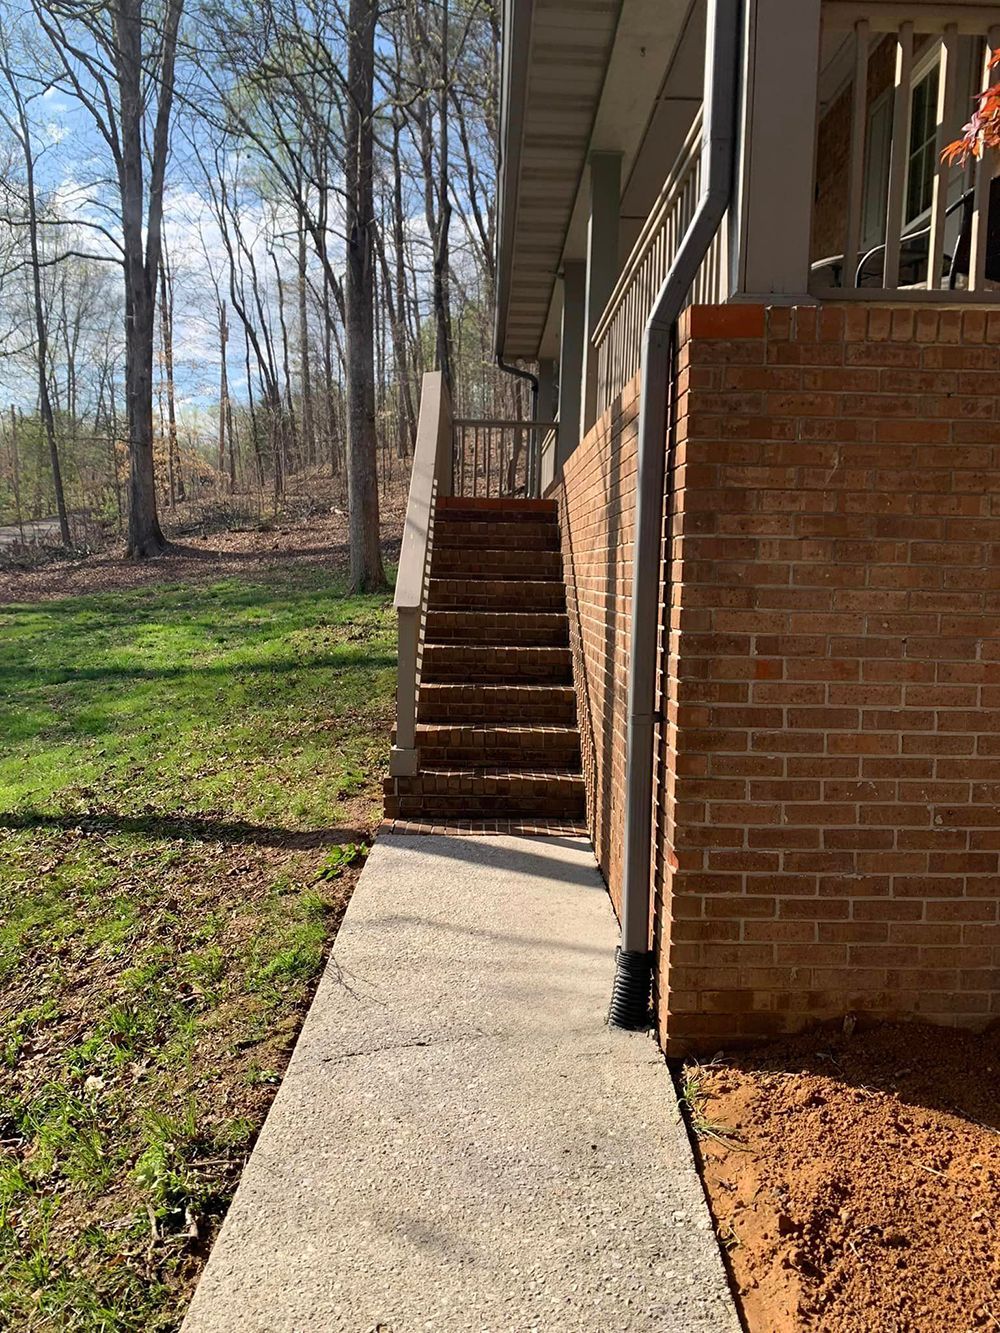 A sidewalk leading to a house with stairs leading up to it